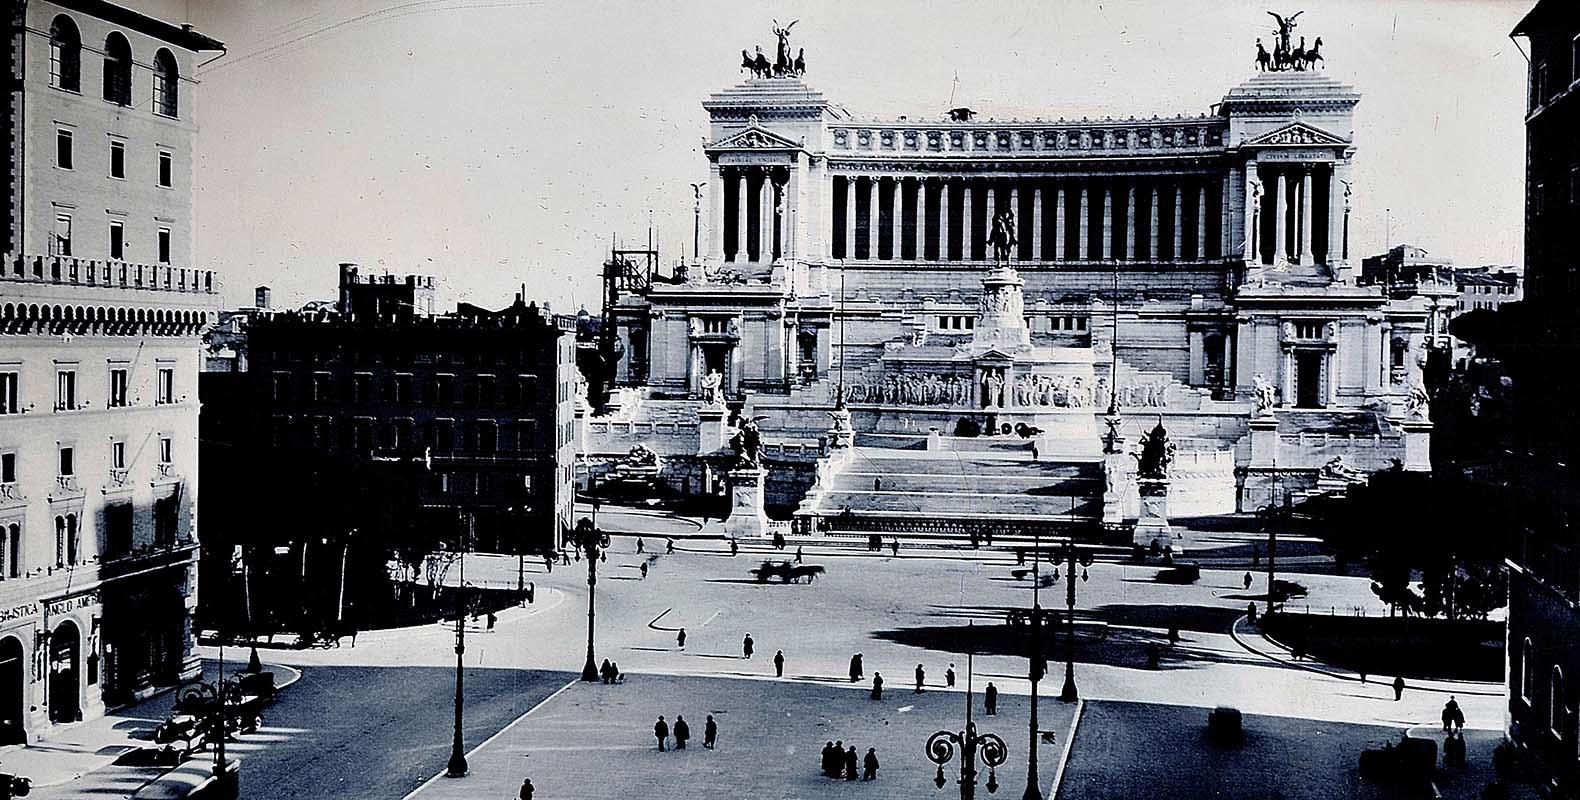 Piazza Venezia in 1930, just a few years after the installation of the two quadrigae on the propylaeum of the Vittoriano
